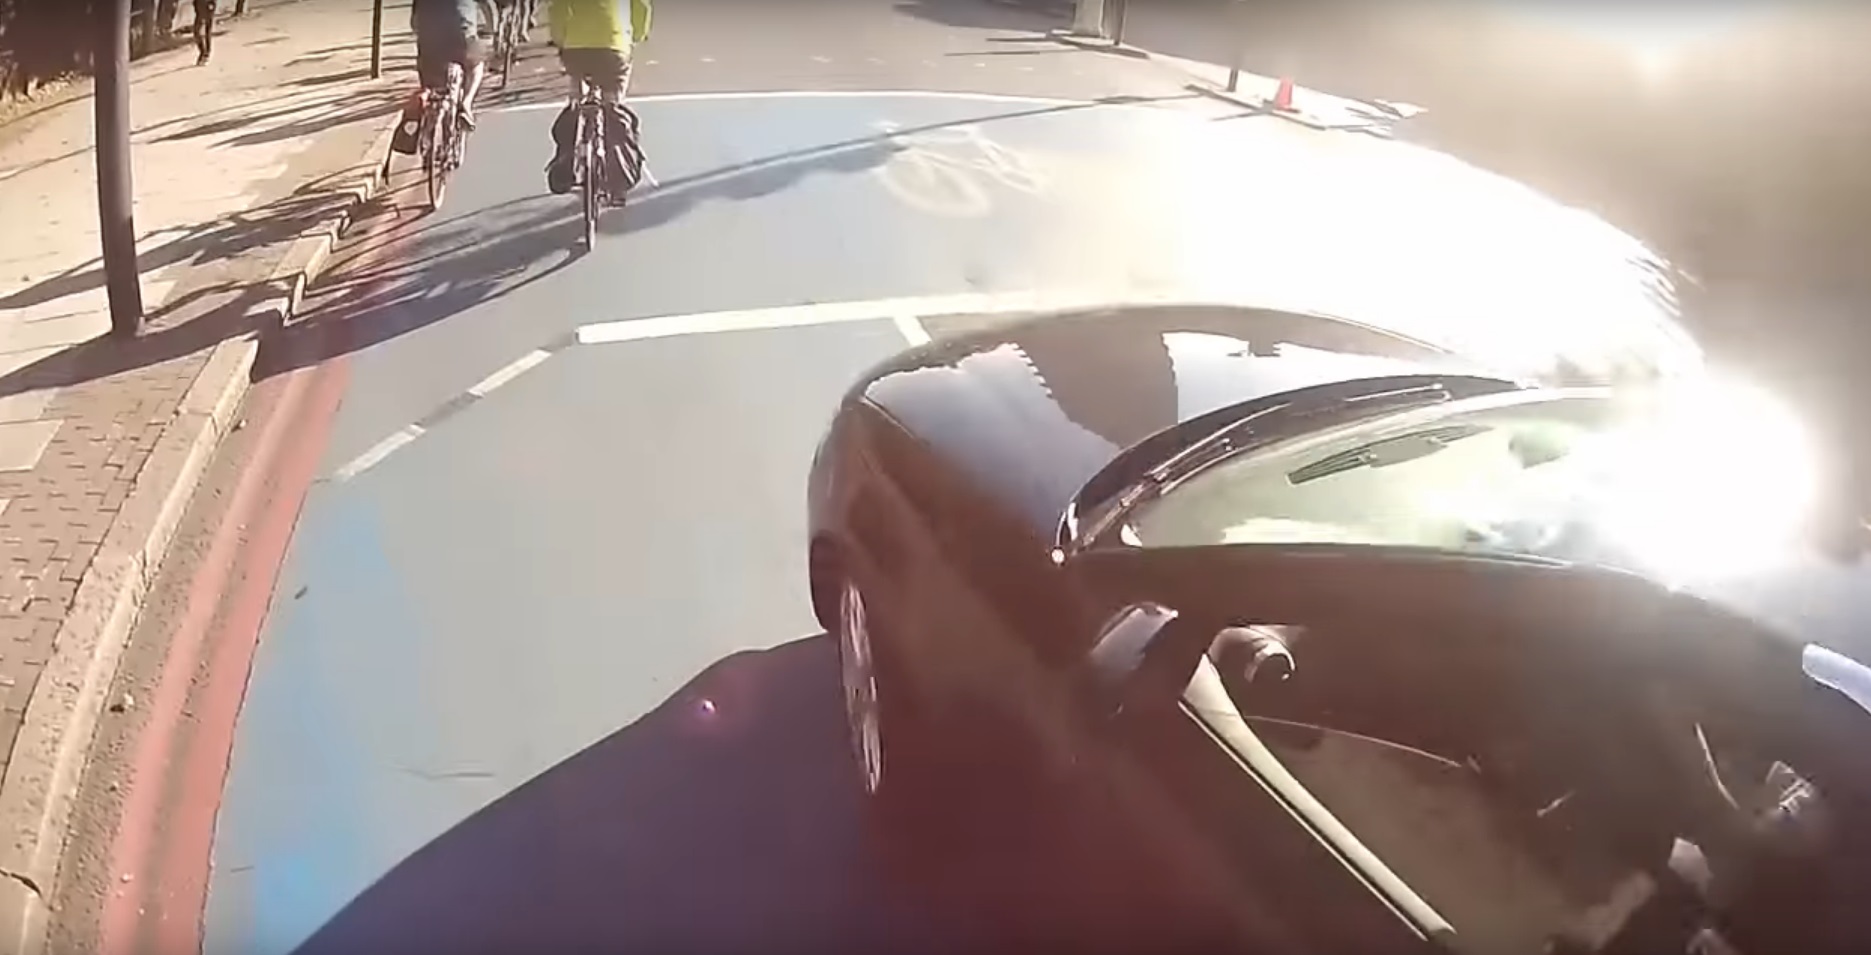 The driver swerves in front of the cyclist